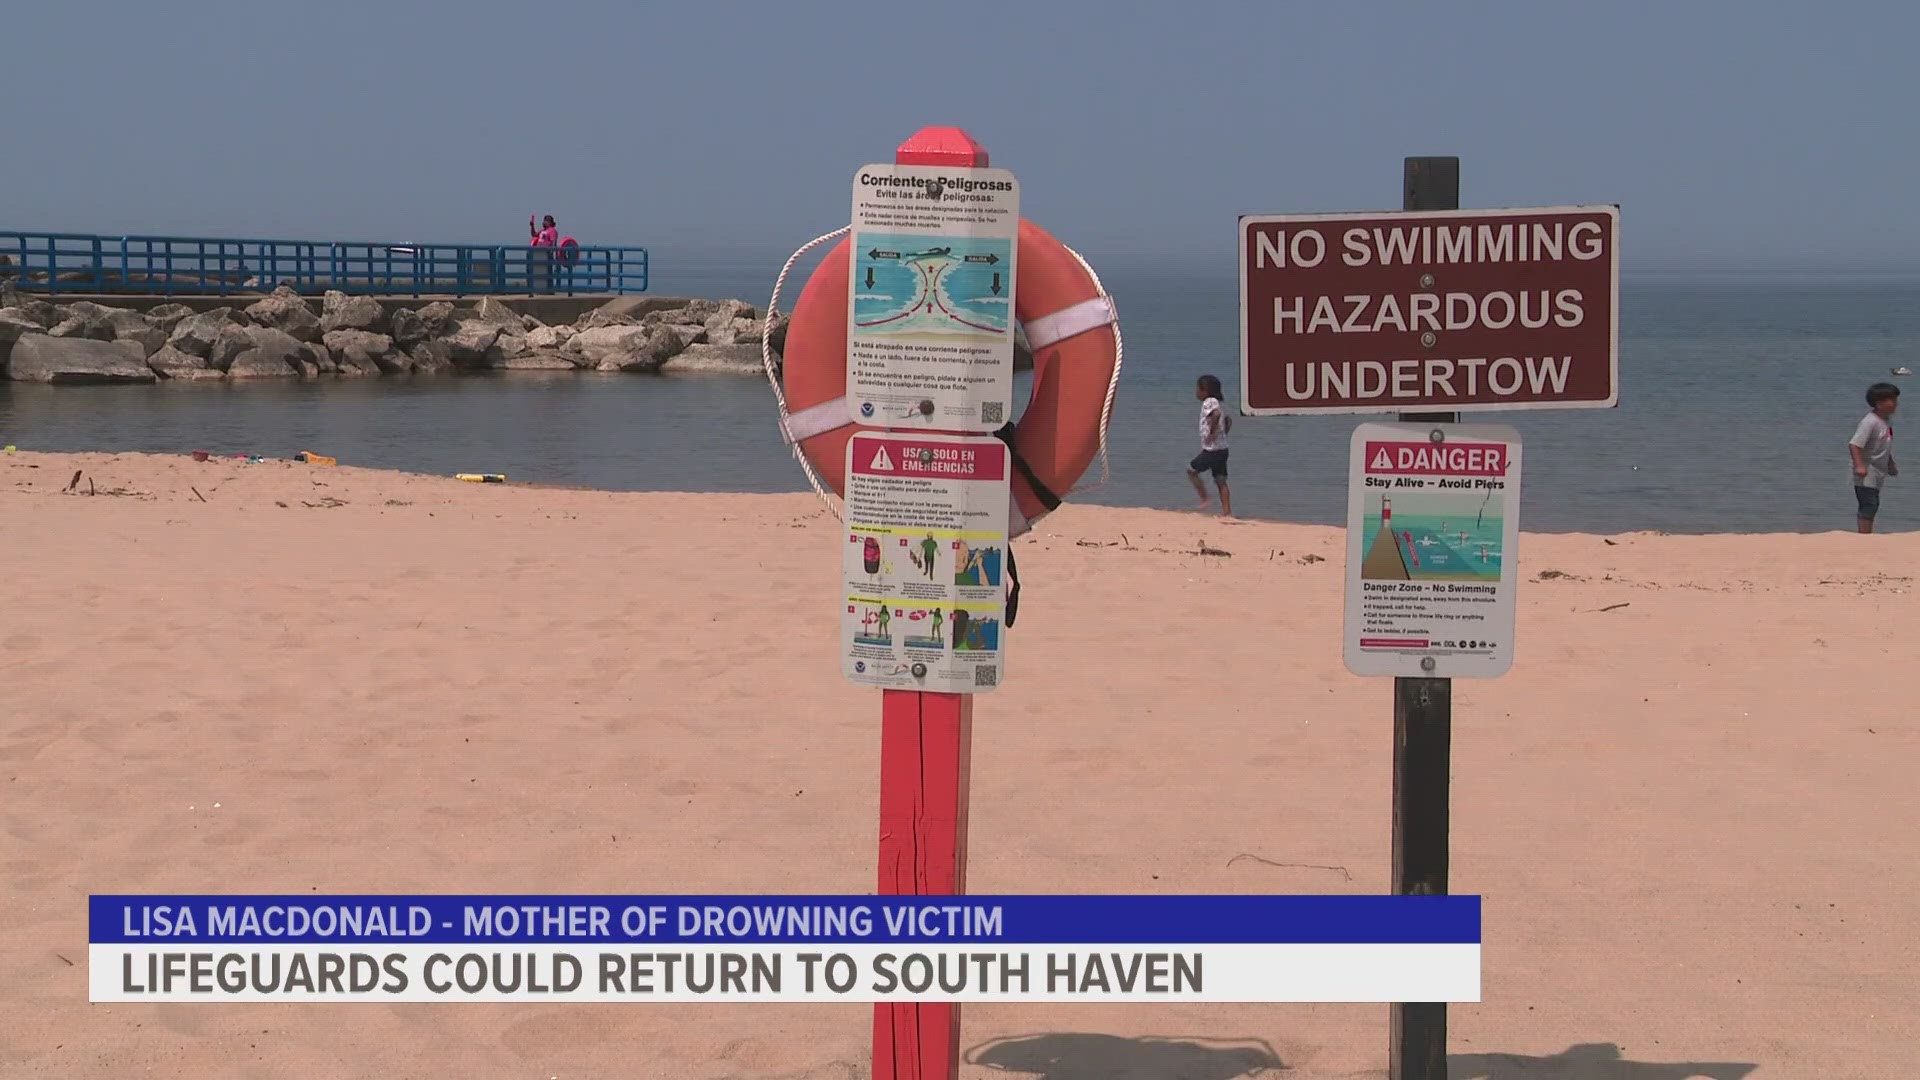 Seven people have drowned in Lake Michigan while swimming at South Haven area beaches. Water safety advocates say it's time for a change.